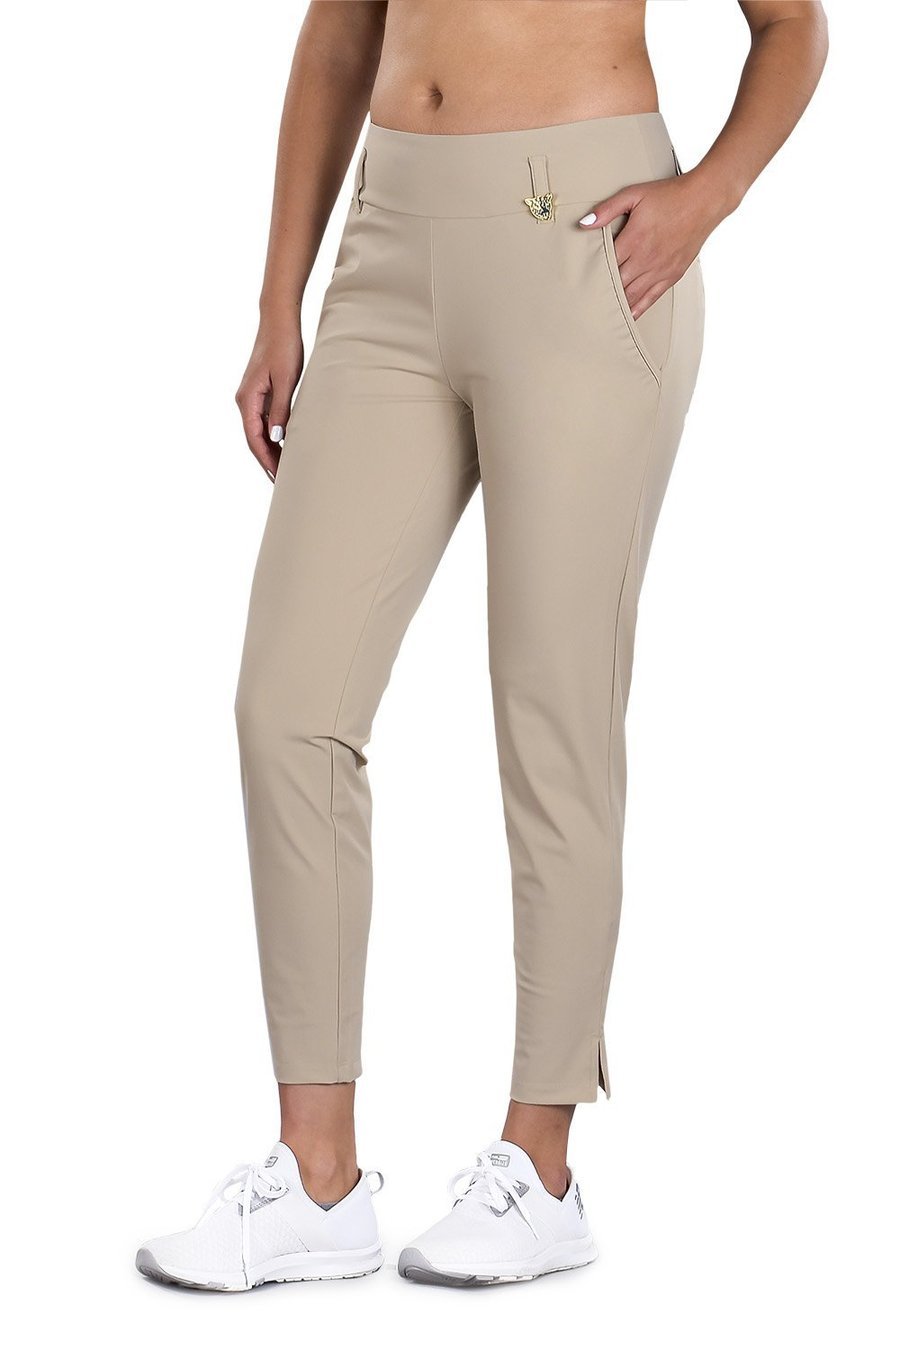 16 Stylish Womens Golf Pants That Hold Up Under Pressure on the Green  Golf  pants women Golf pants Golf outfit